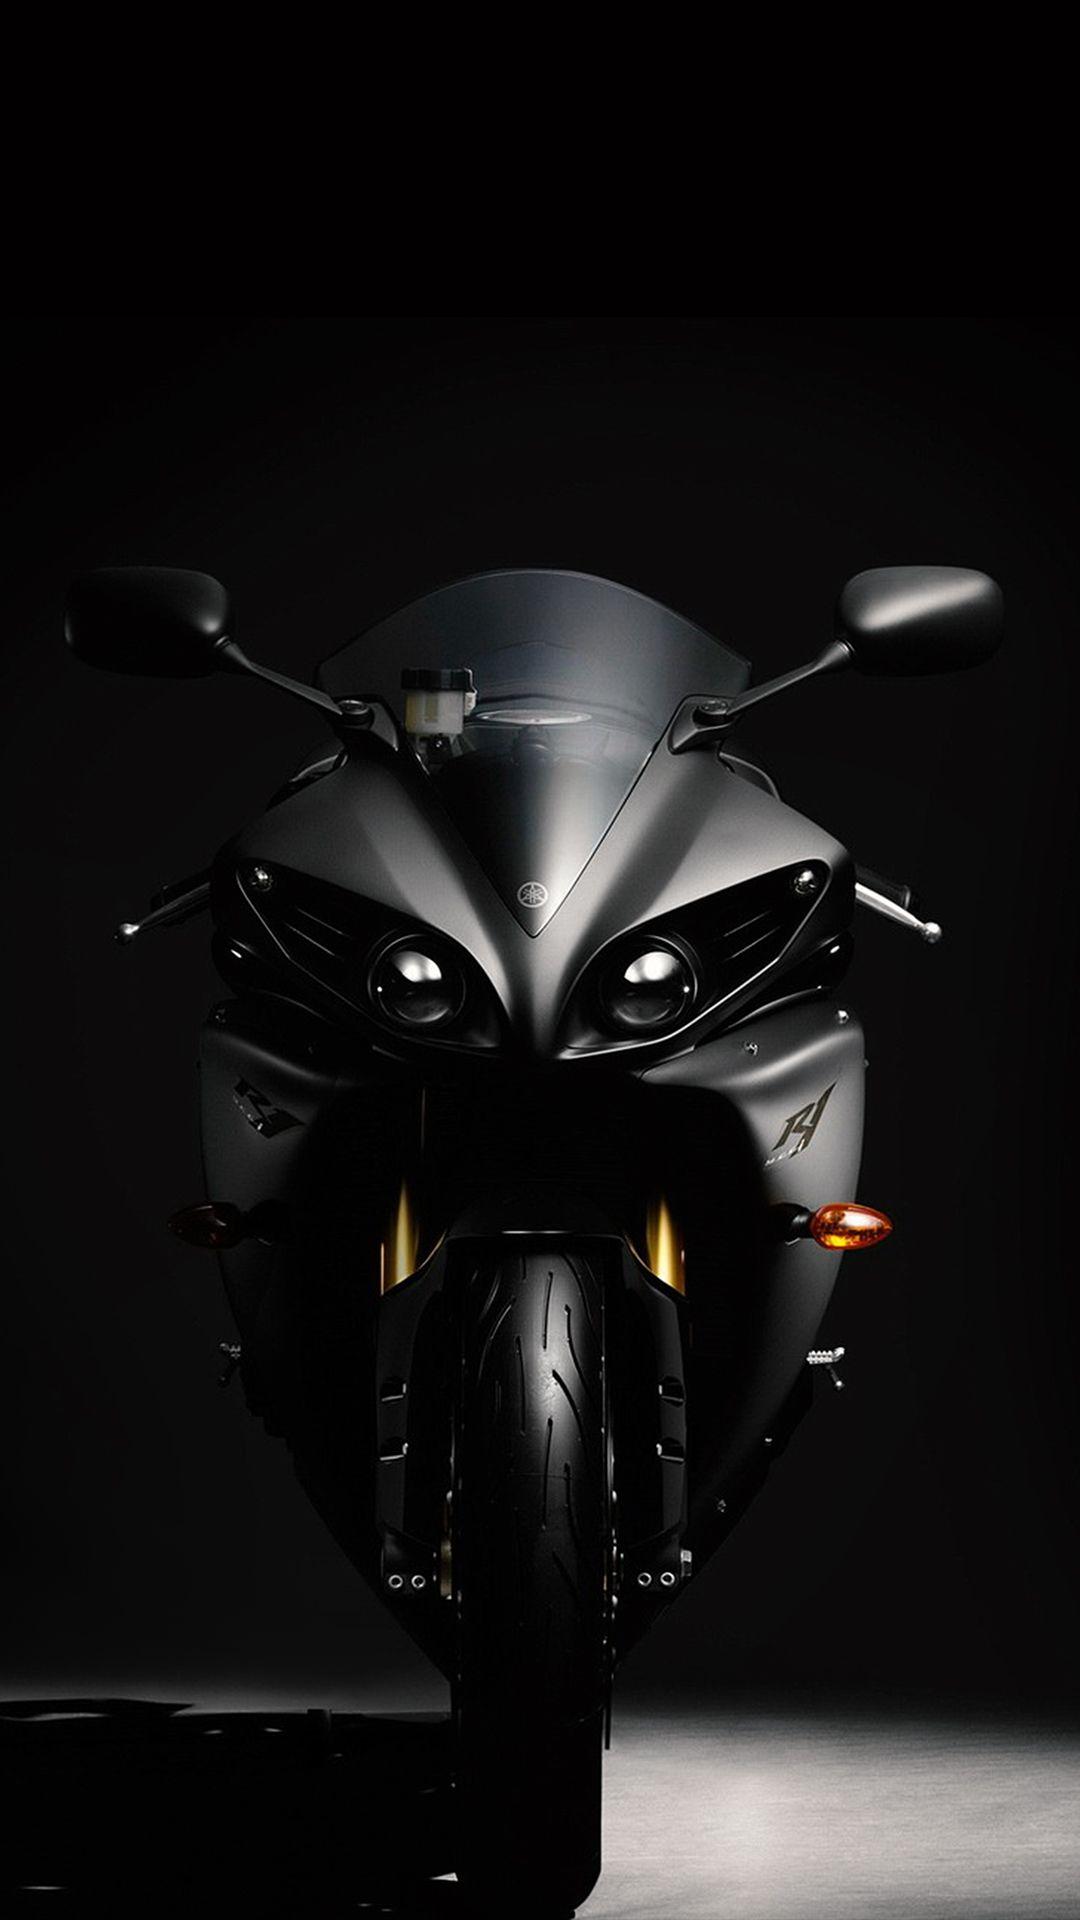 Black R1 HD Wallpaper For Your Mobile Phone